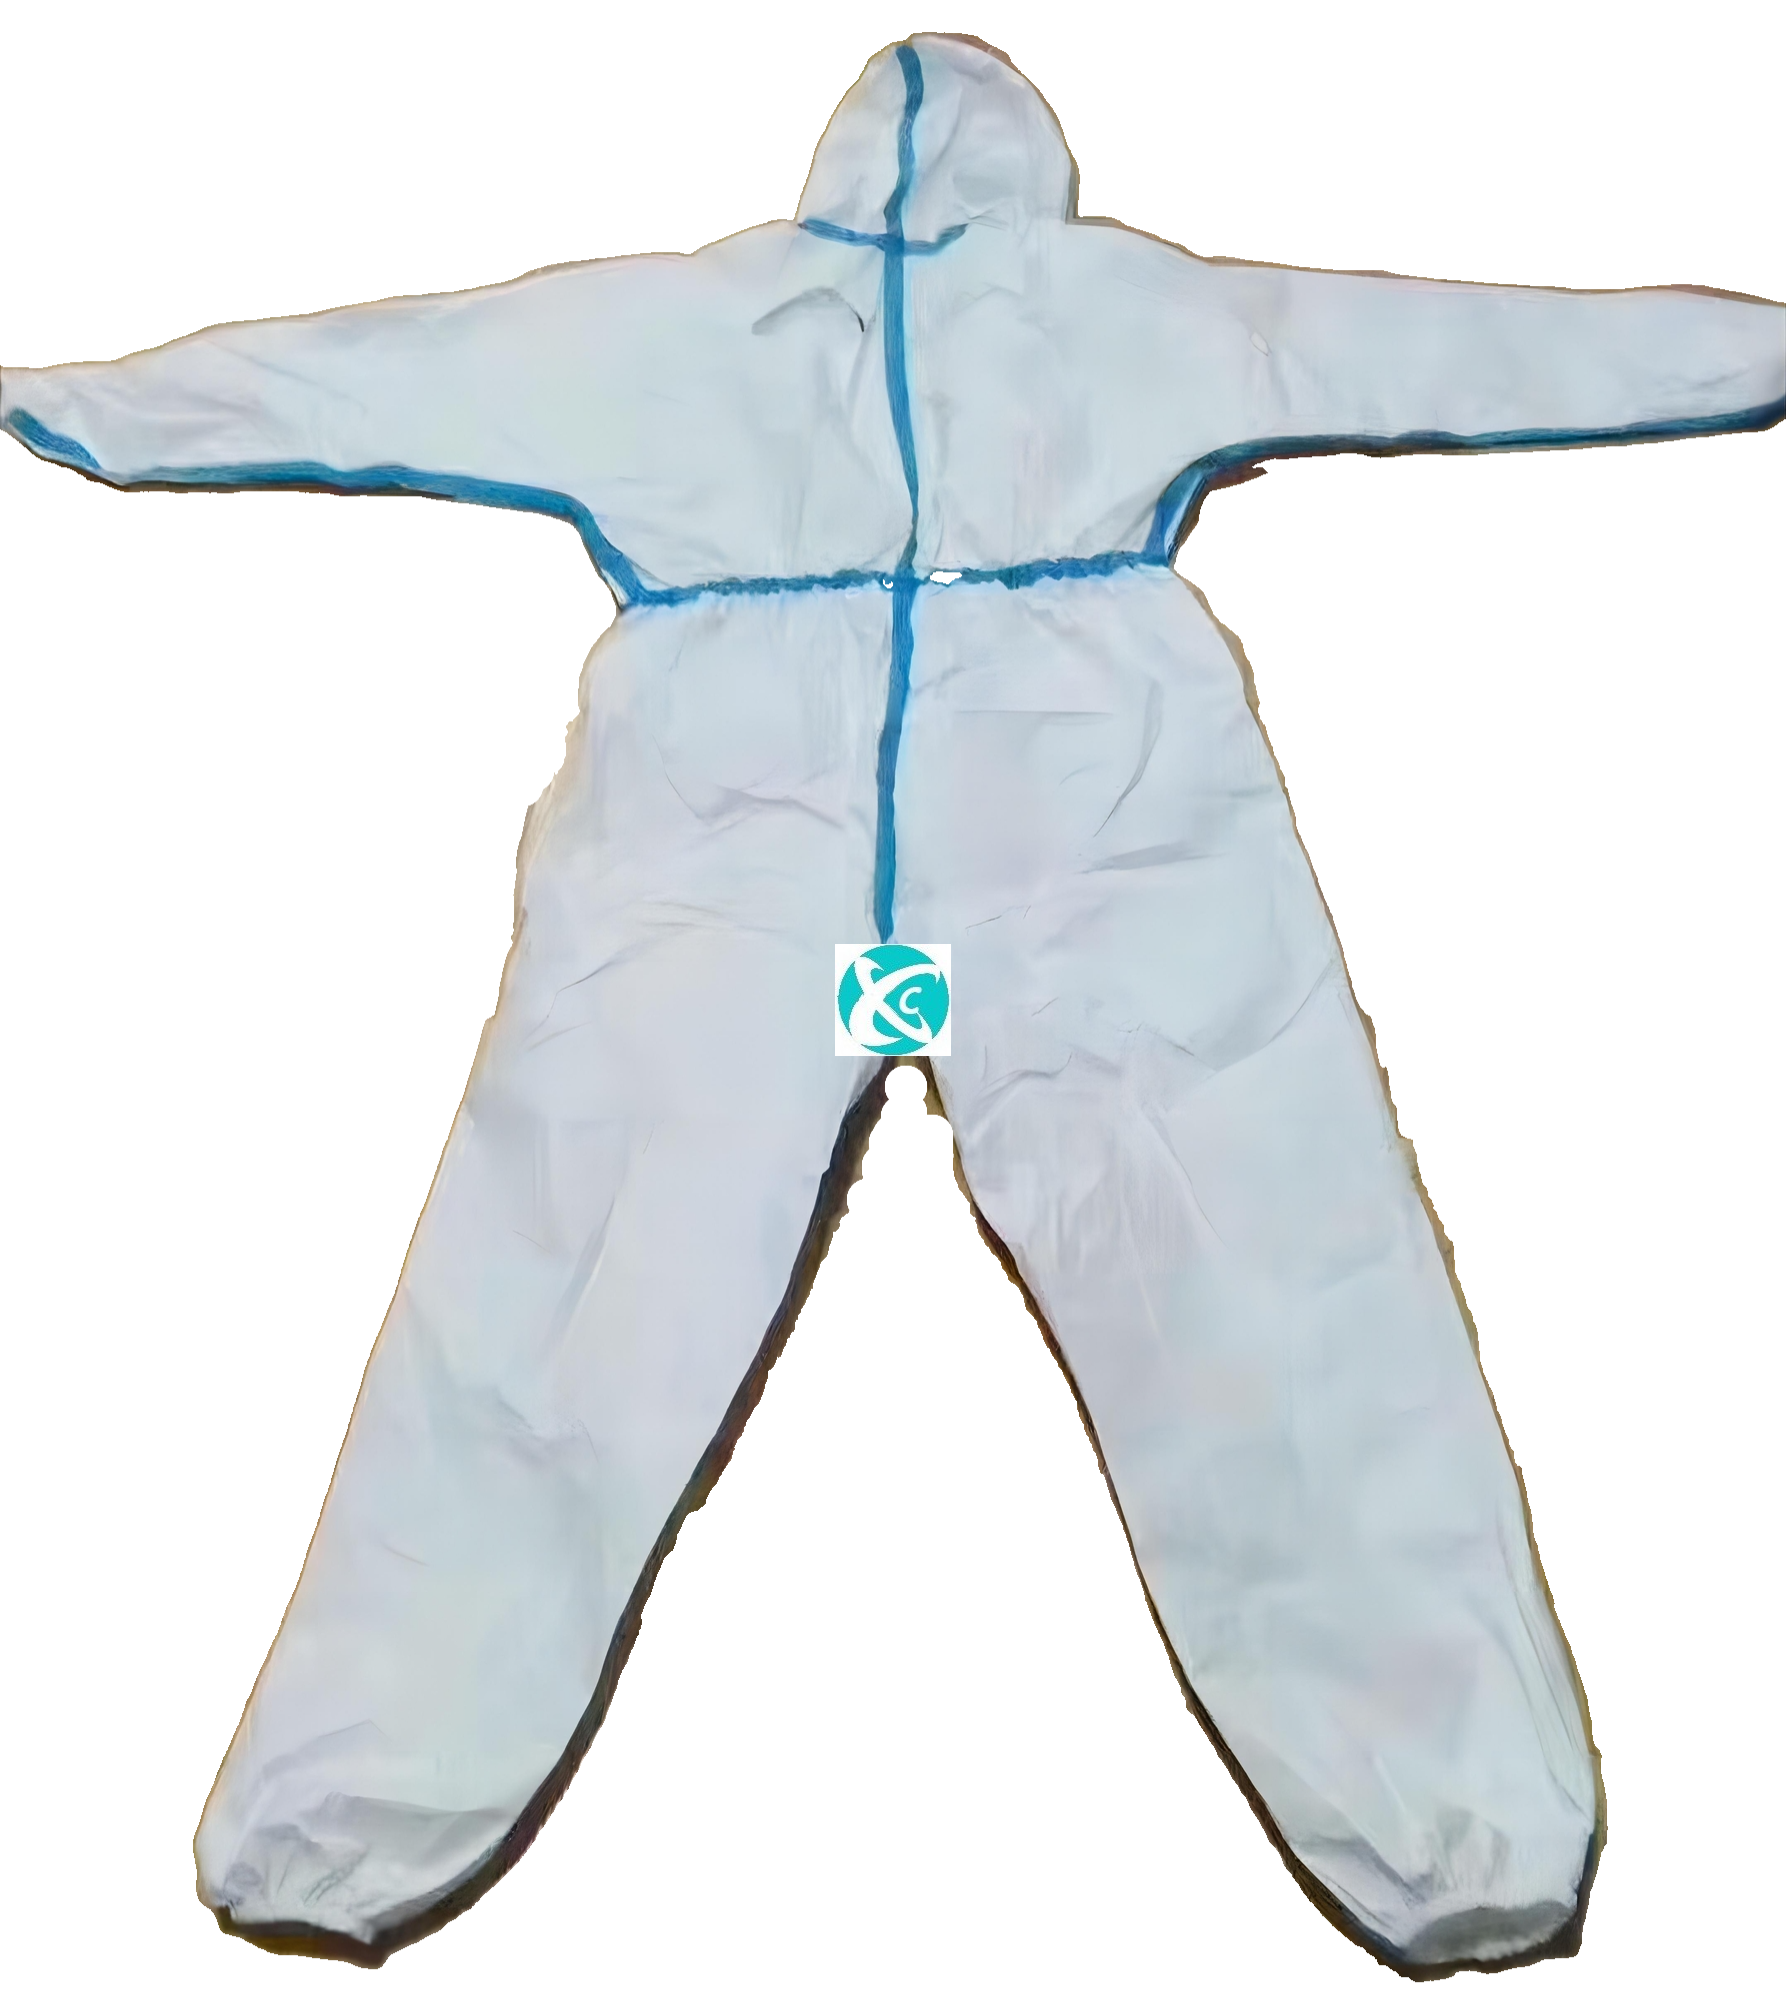 Disposable Protective Suit for medical use disposable protective clothing